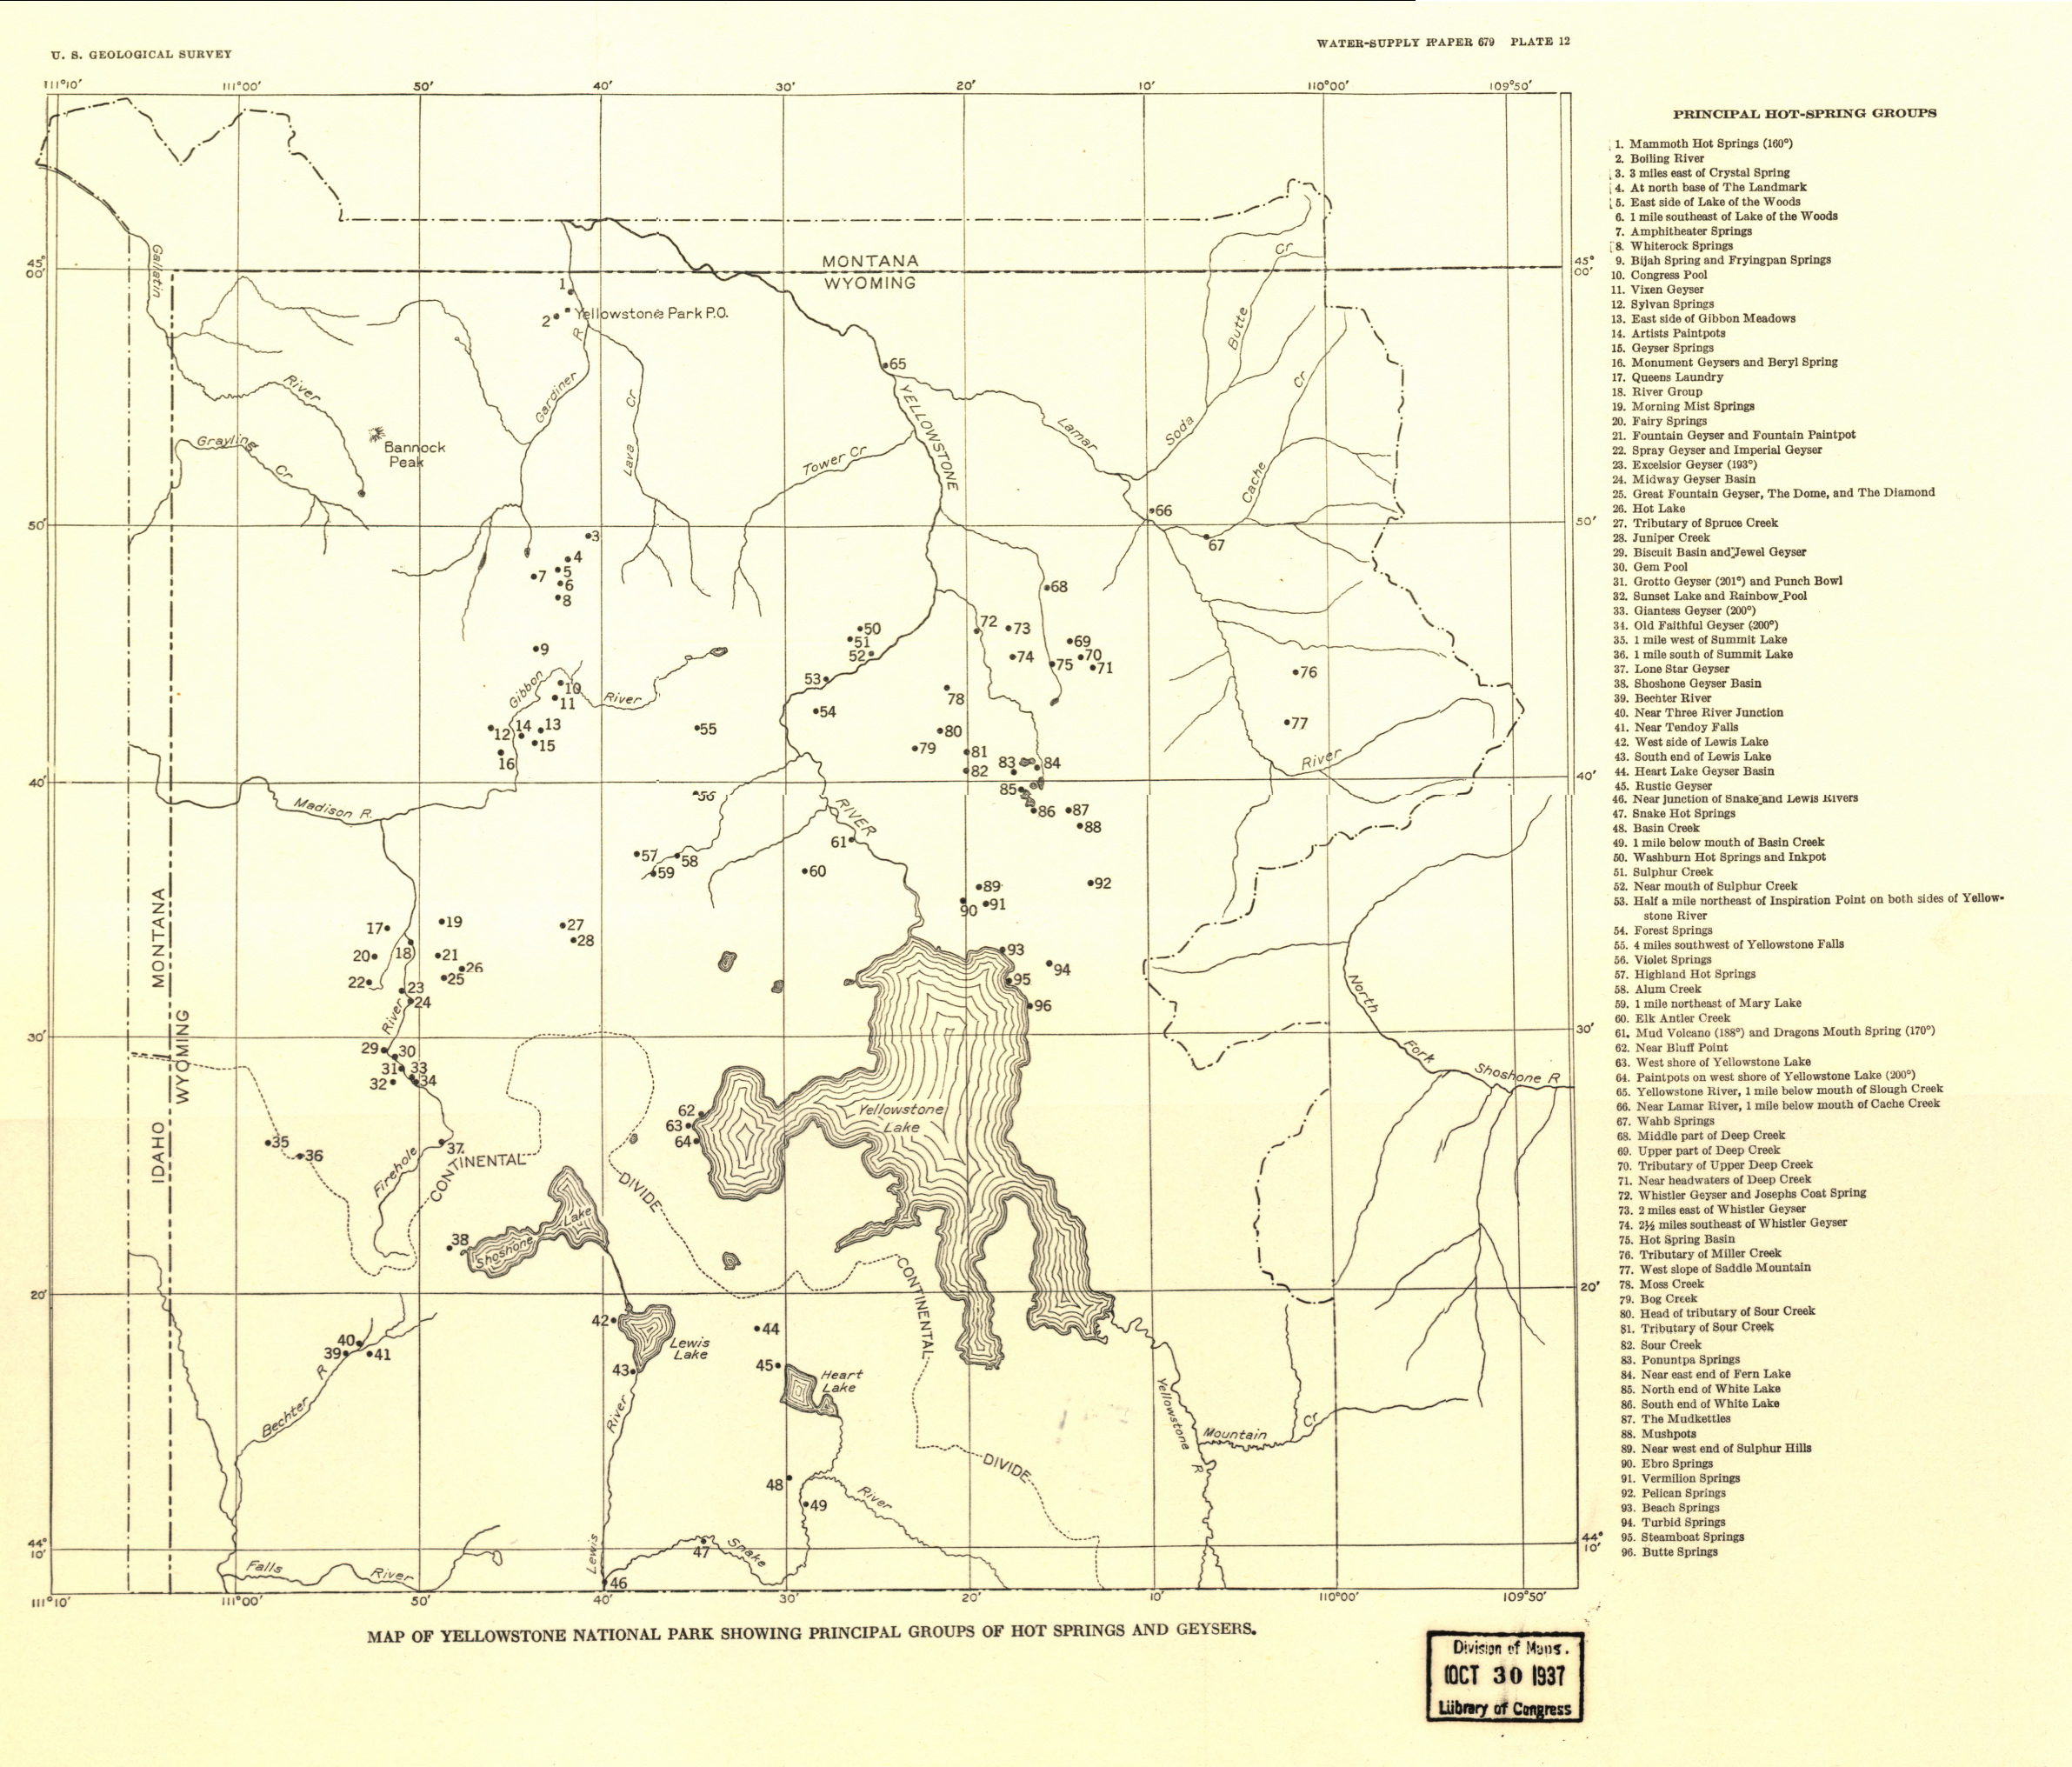 Yellowstone National Park Water Supply Map from the Library of Congress Collection